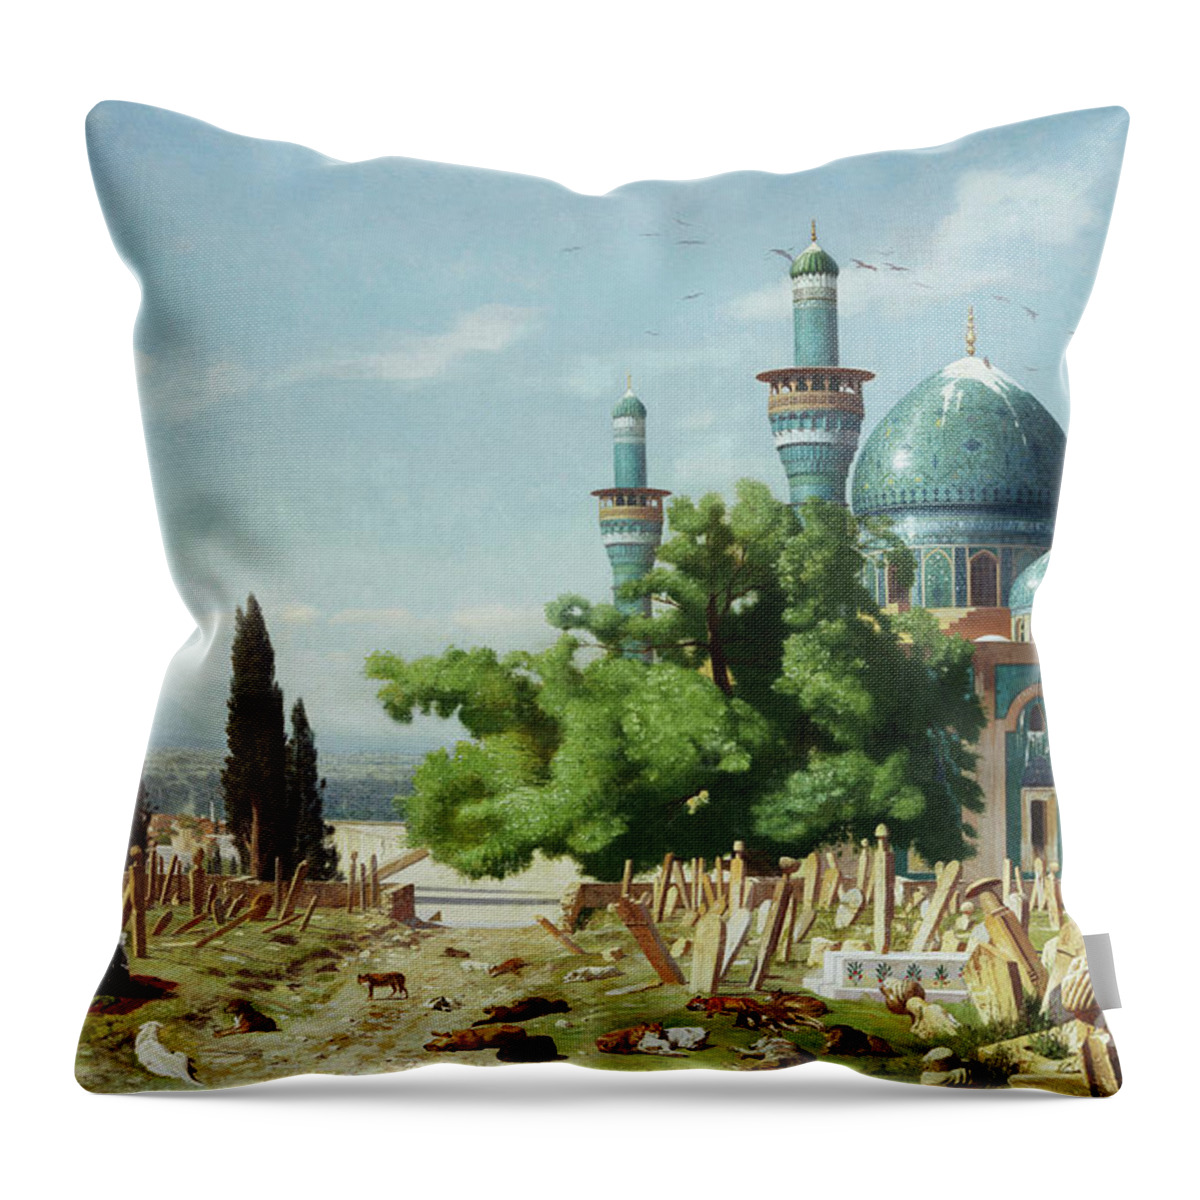 Animal Throw Pillow featuring the painting The Fields Of Rest, Brousse by Jean Leon Gerome